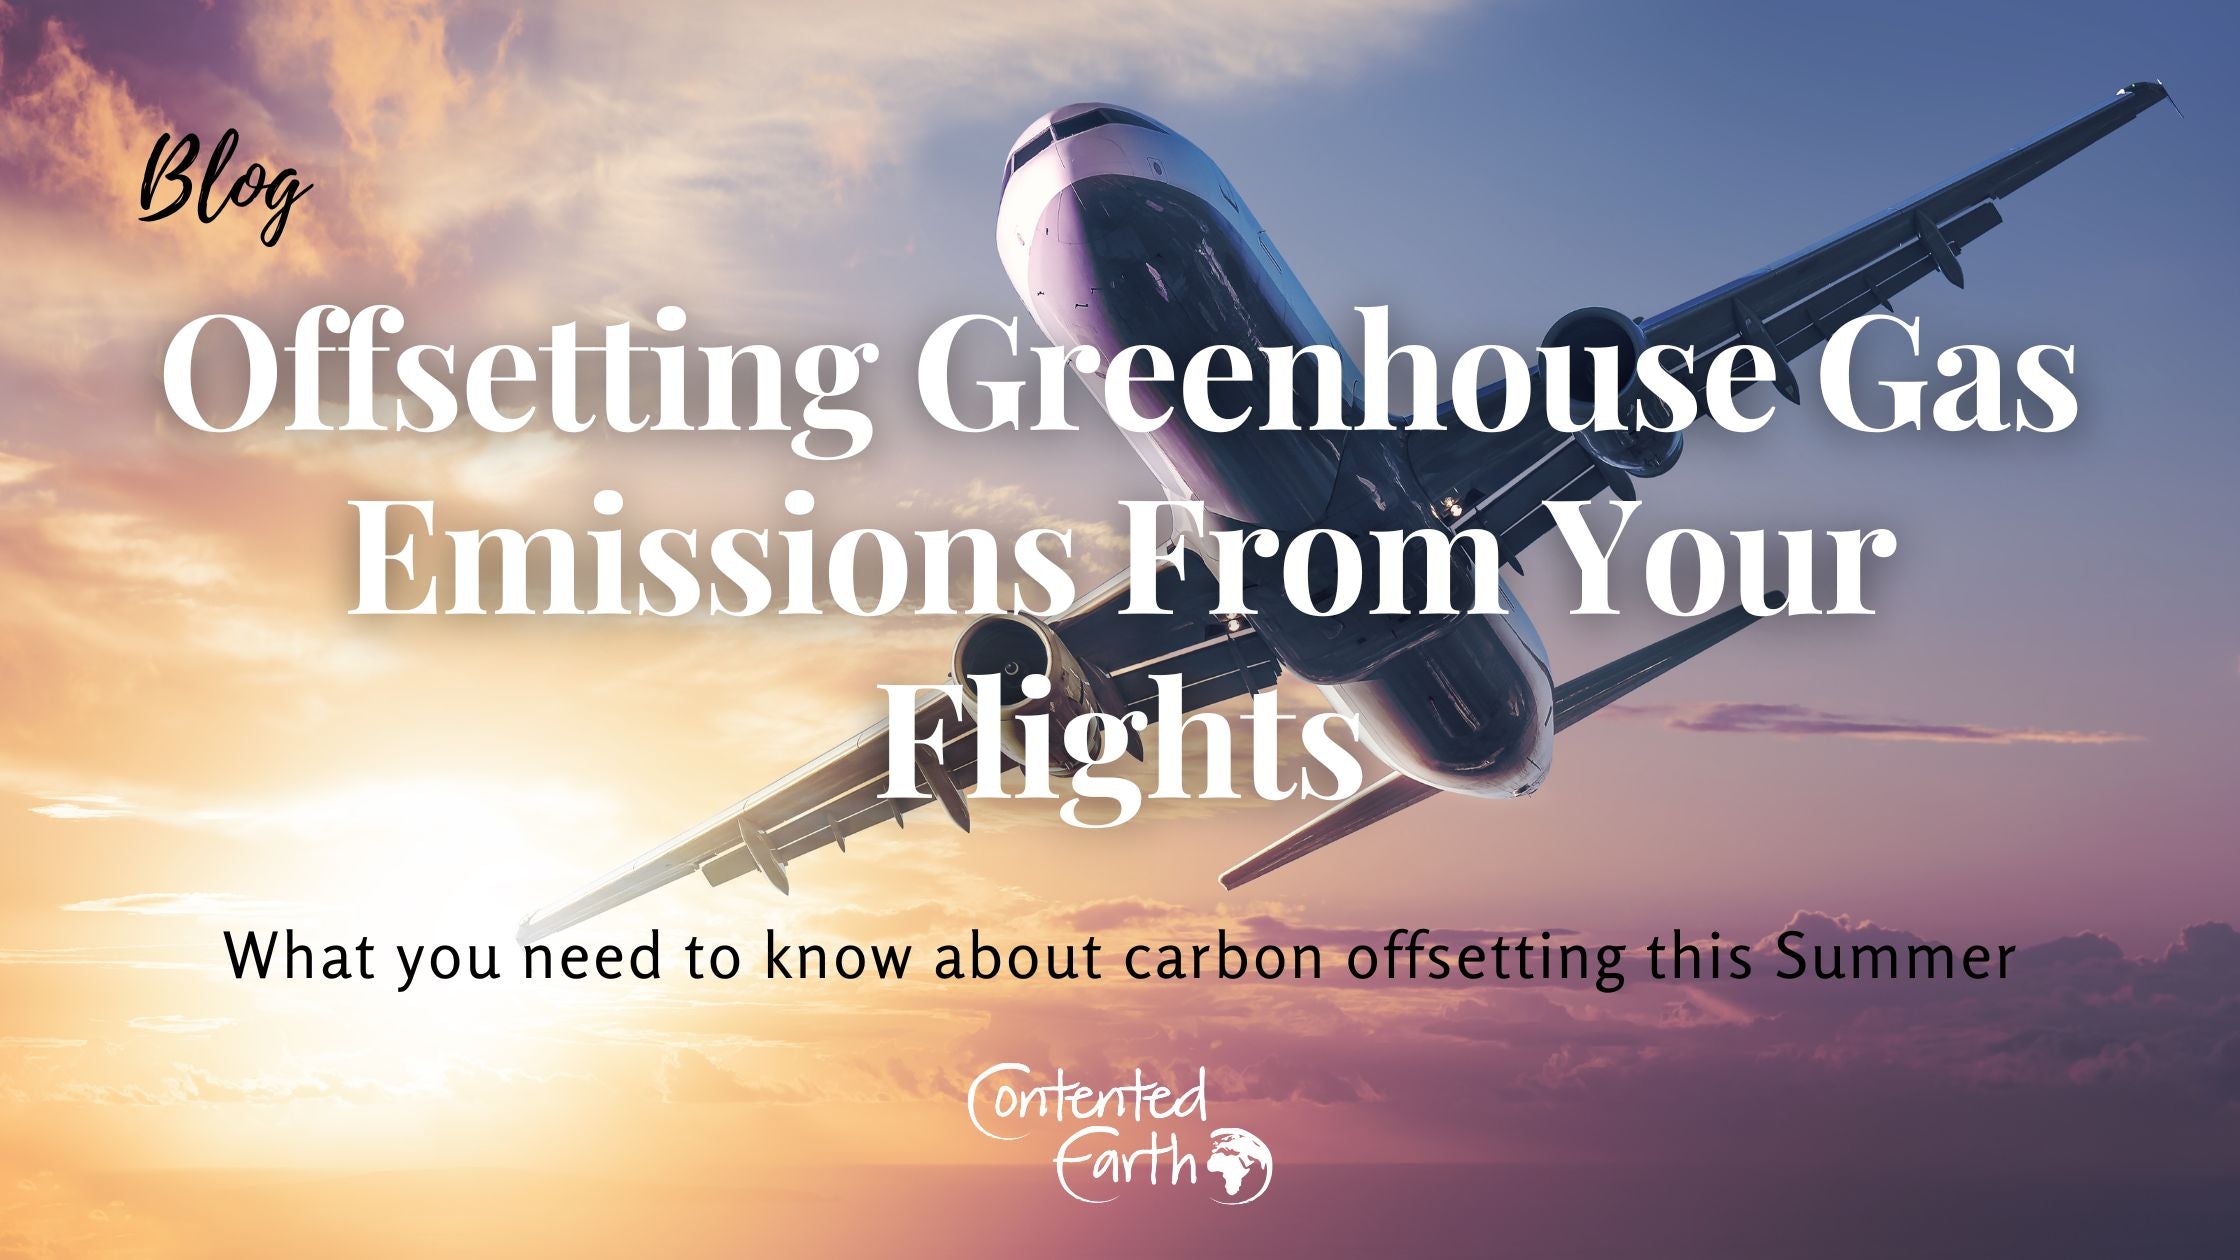 Contented Earth | Blog | Climate Change | Greenhouse gas emissions carbon footprint | Blog | Offsetting the Greenhouse Gas Emissions From Your Flights - banner